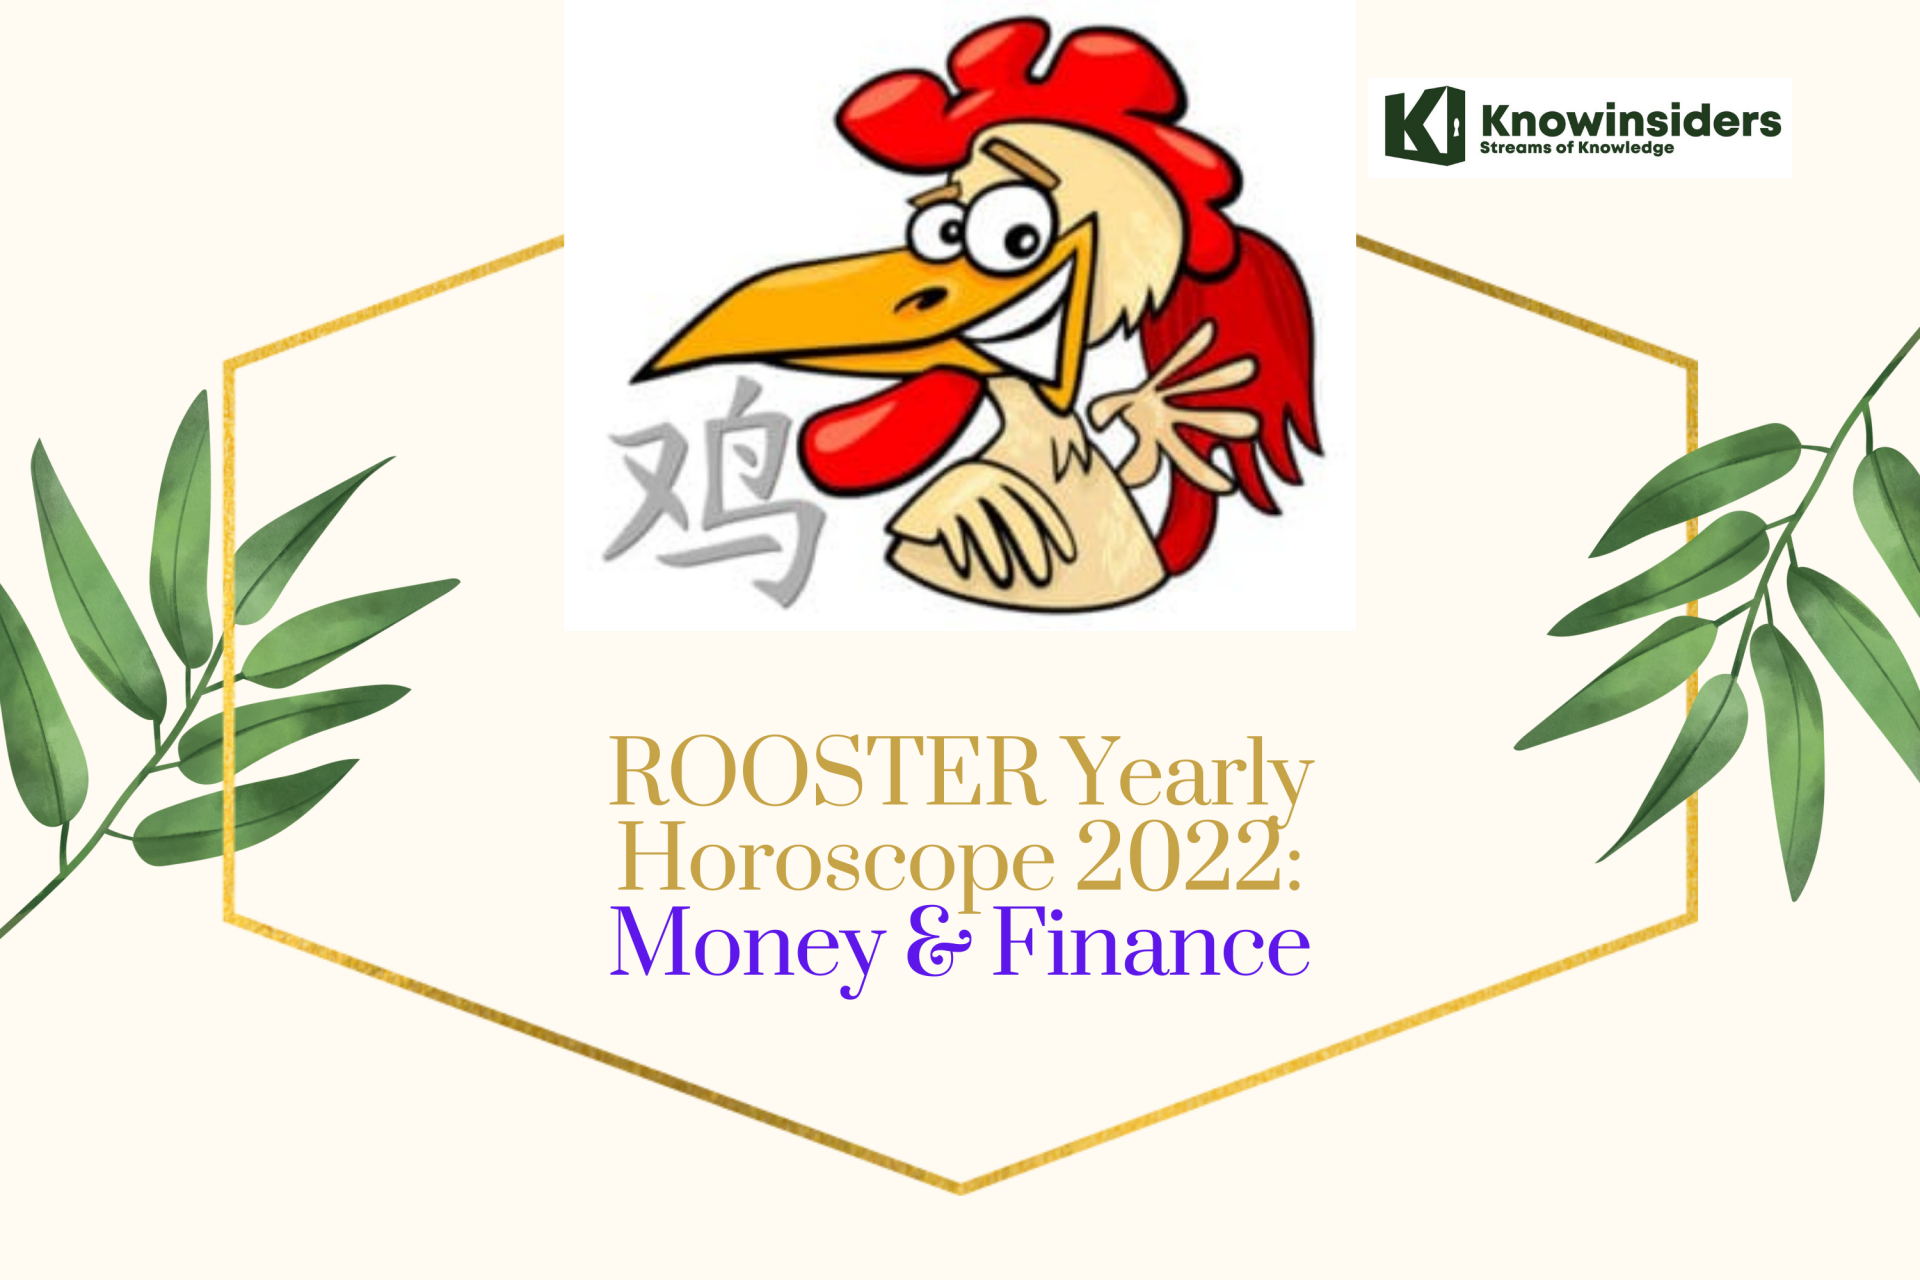 ROOSTER Yearly Horoscope 2022 – Feng Shui Prediction for Money & Finance